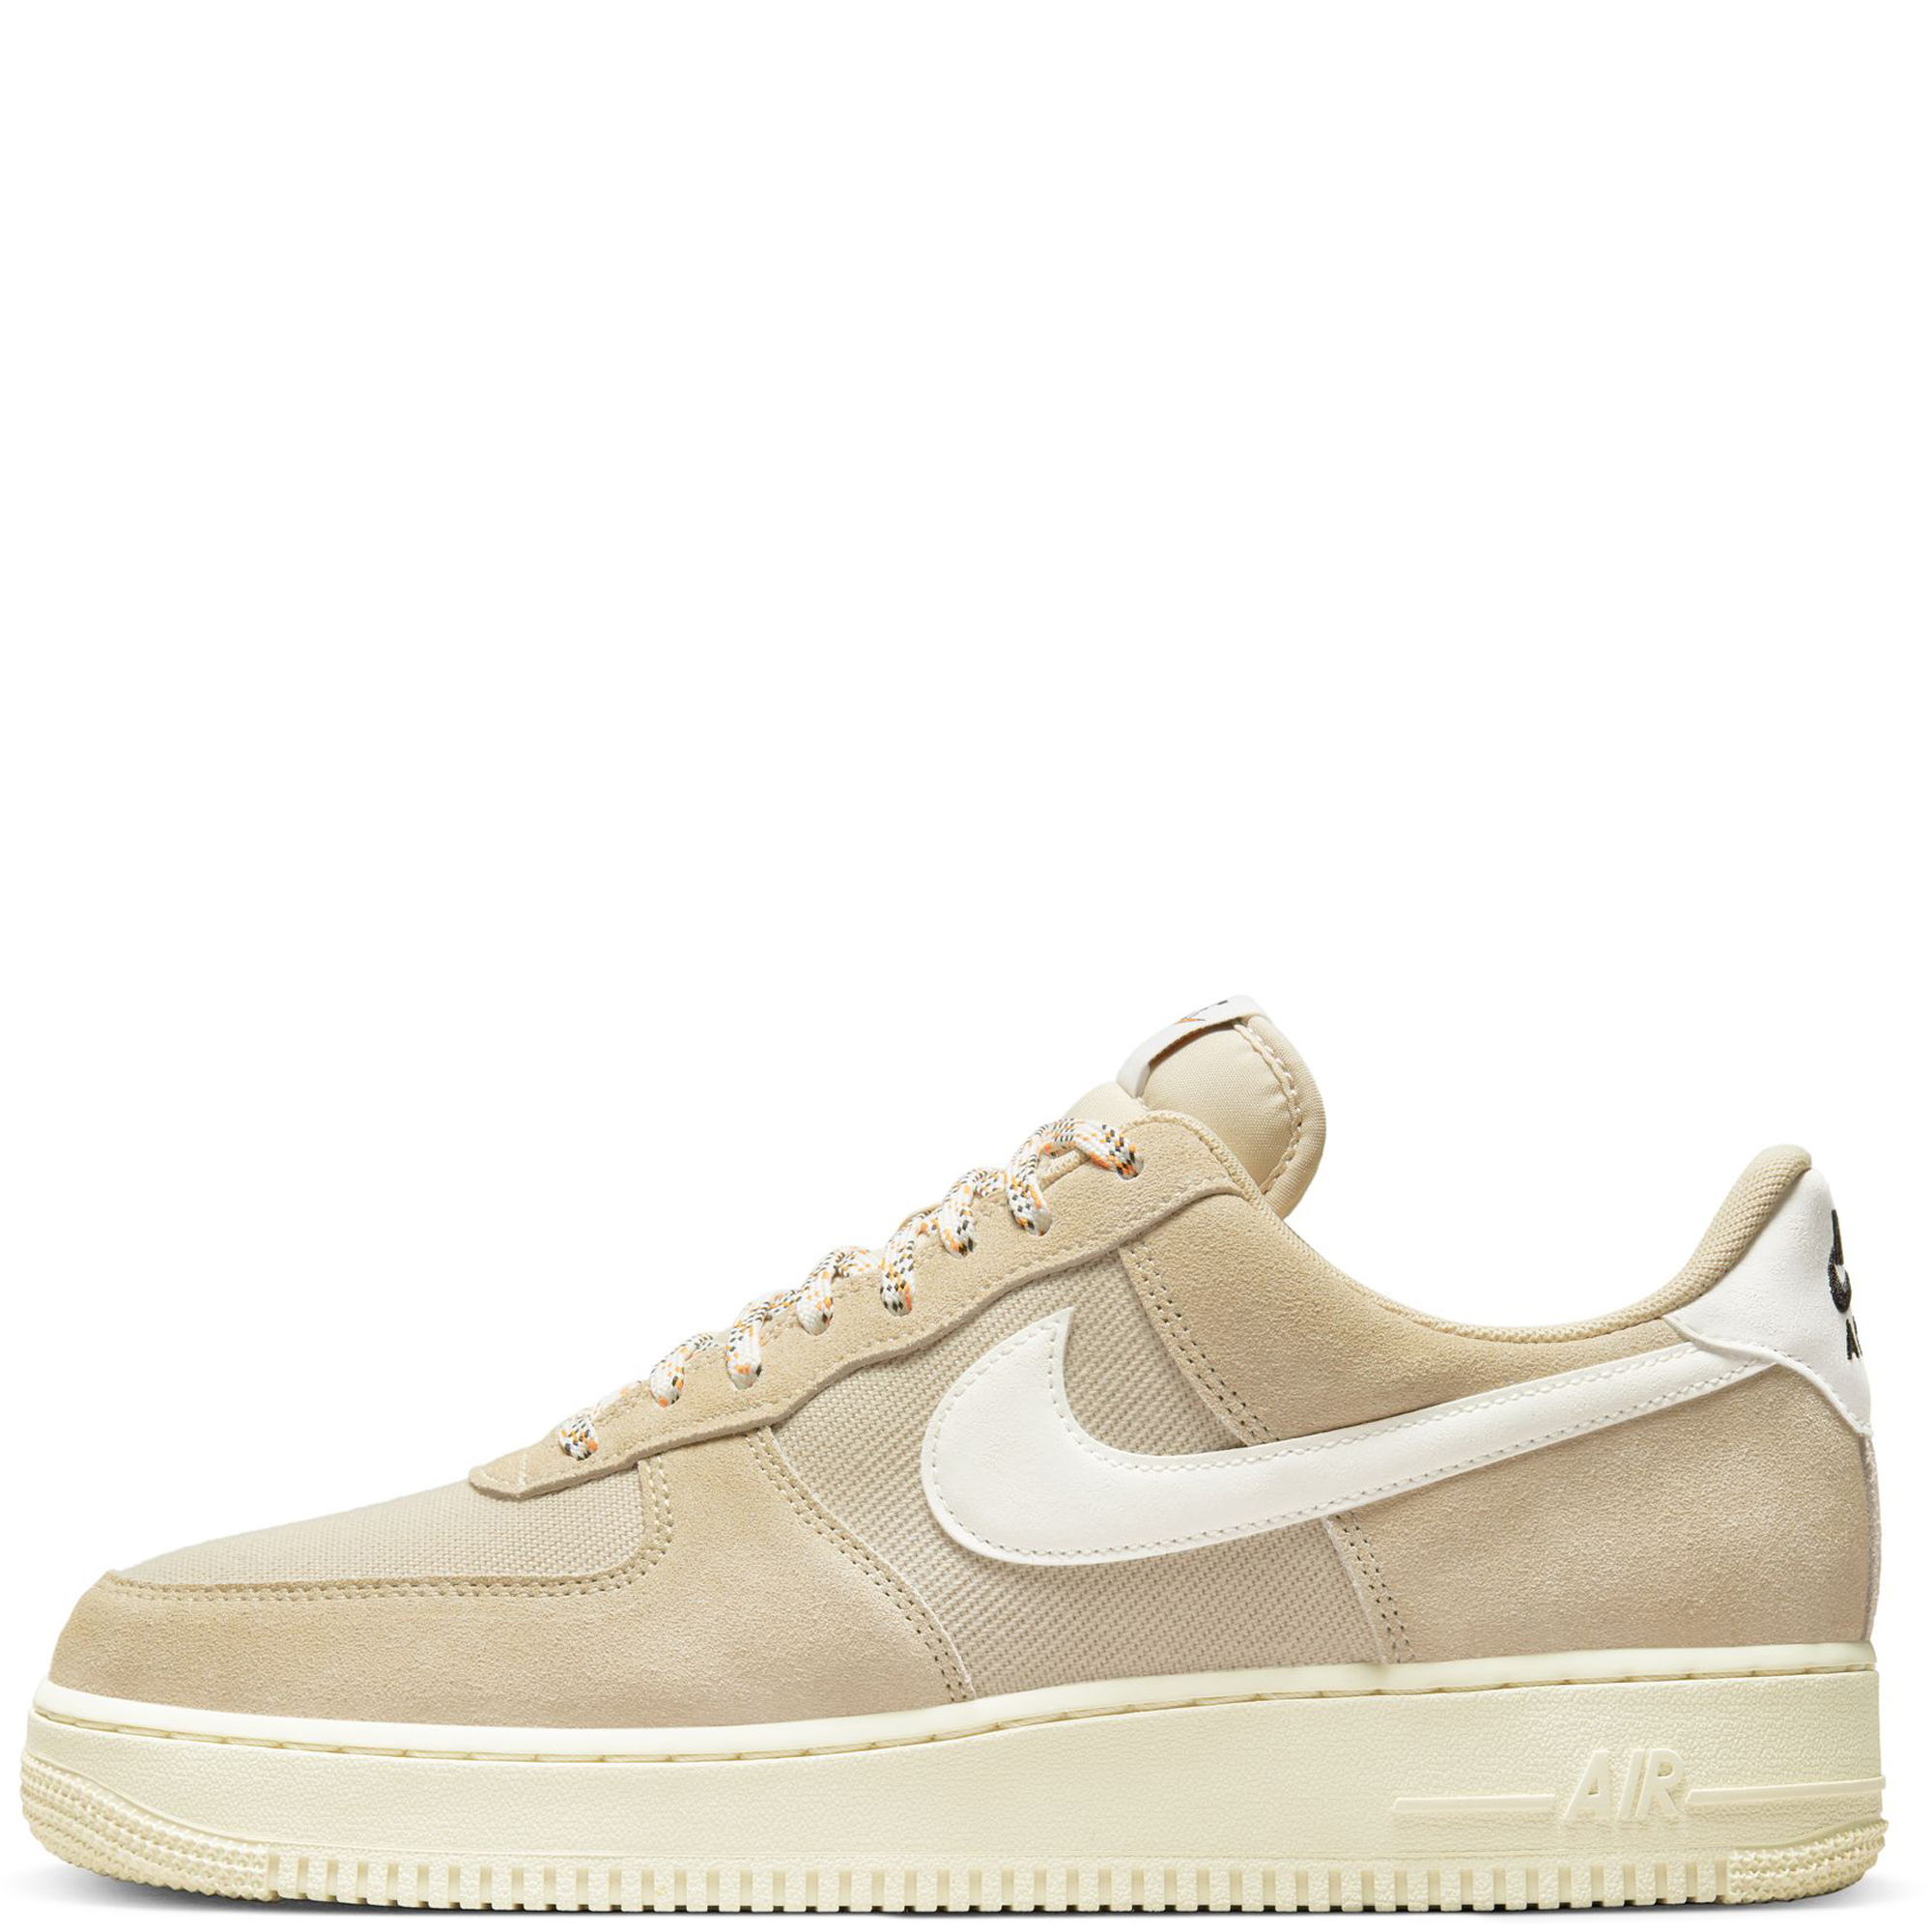 Nike Air Force 1 07 LV8 Suede: On-Foot Shots - The Drop Date